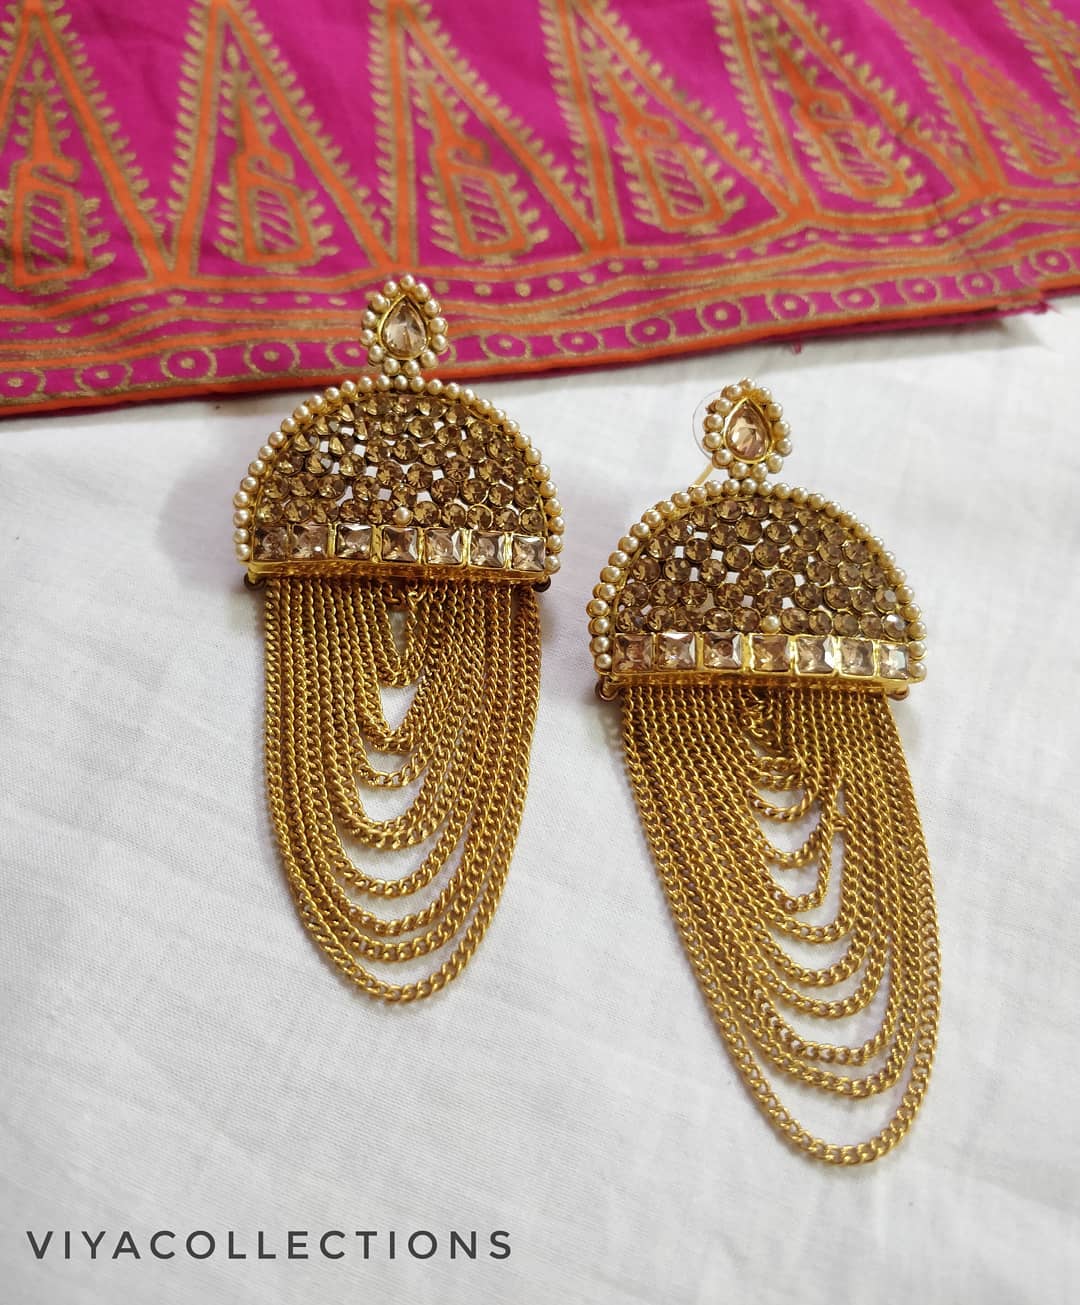 Unique Earring From Viya Collections